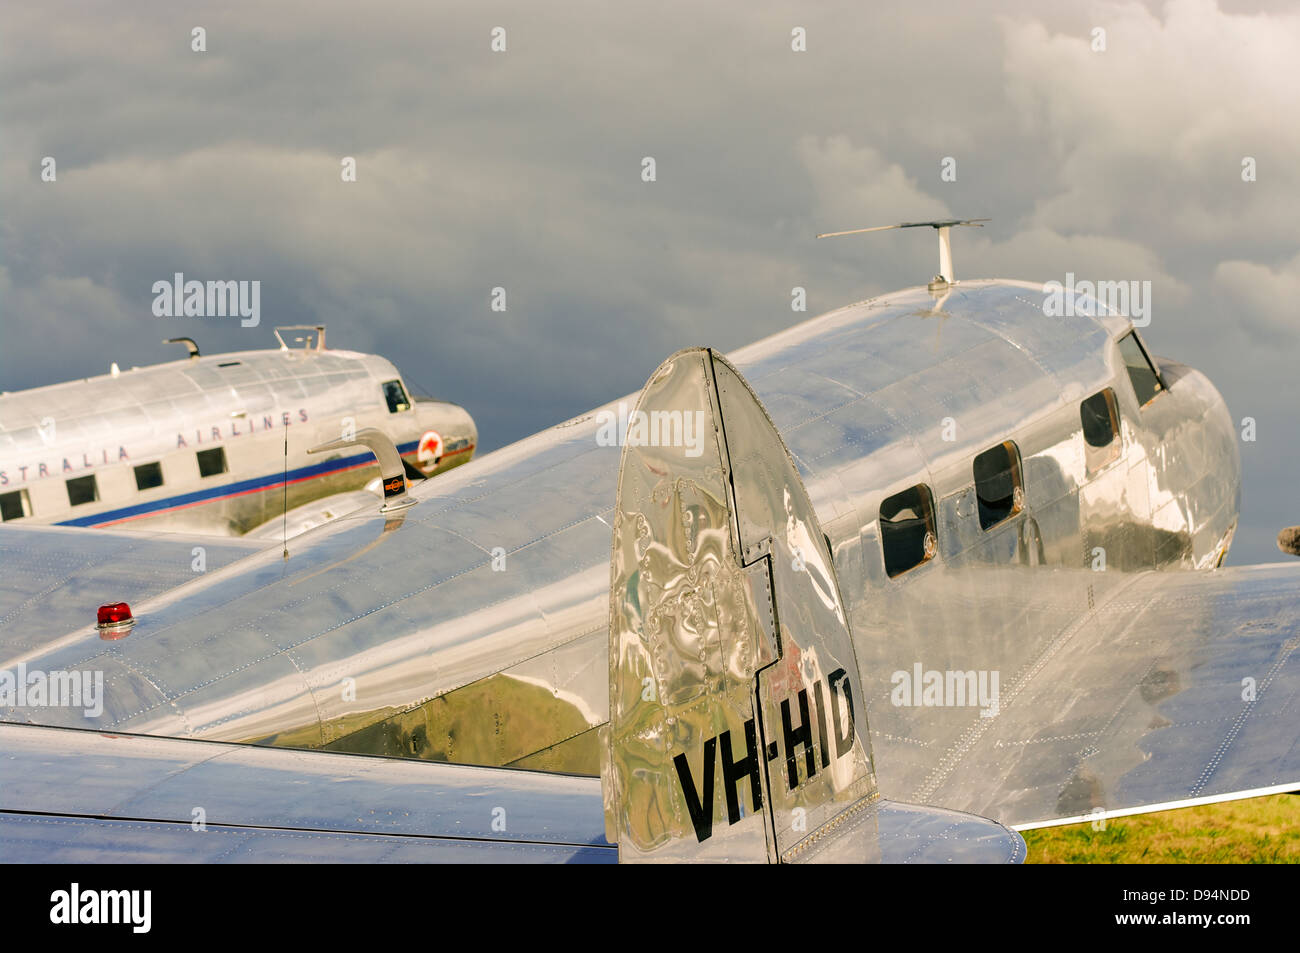 Tail view of a Lockheed Electra 12a Junior with a former Australian Airlines DC-3 behind. Stock Photo